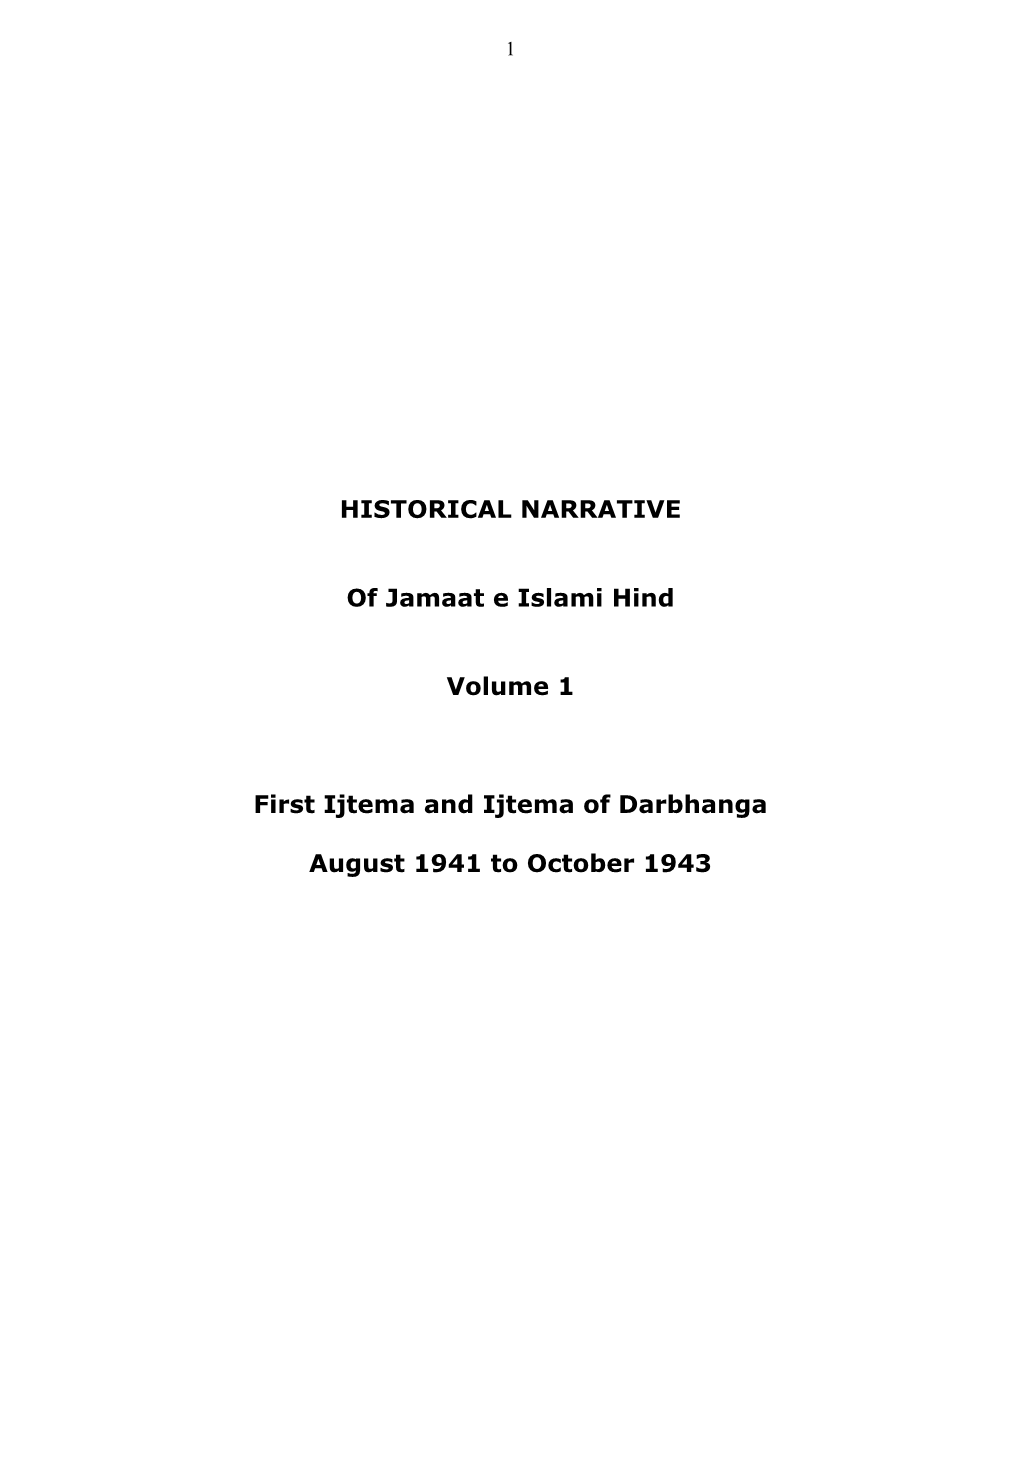 HISTORICAL NARRATIVE of Jamaat E Islami Hind Volume 1 First